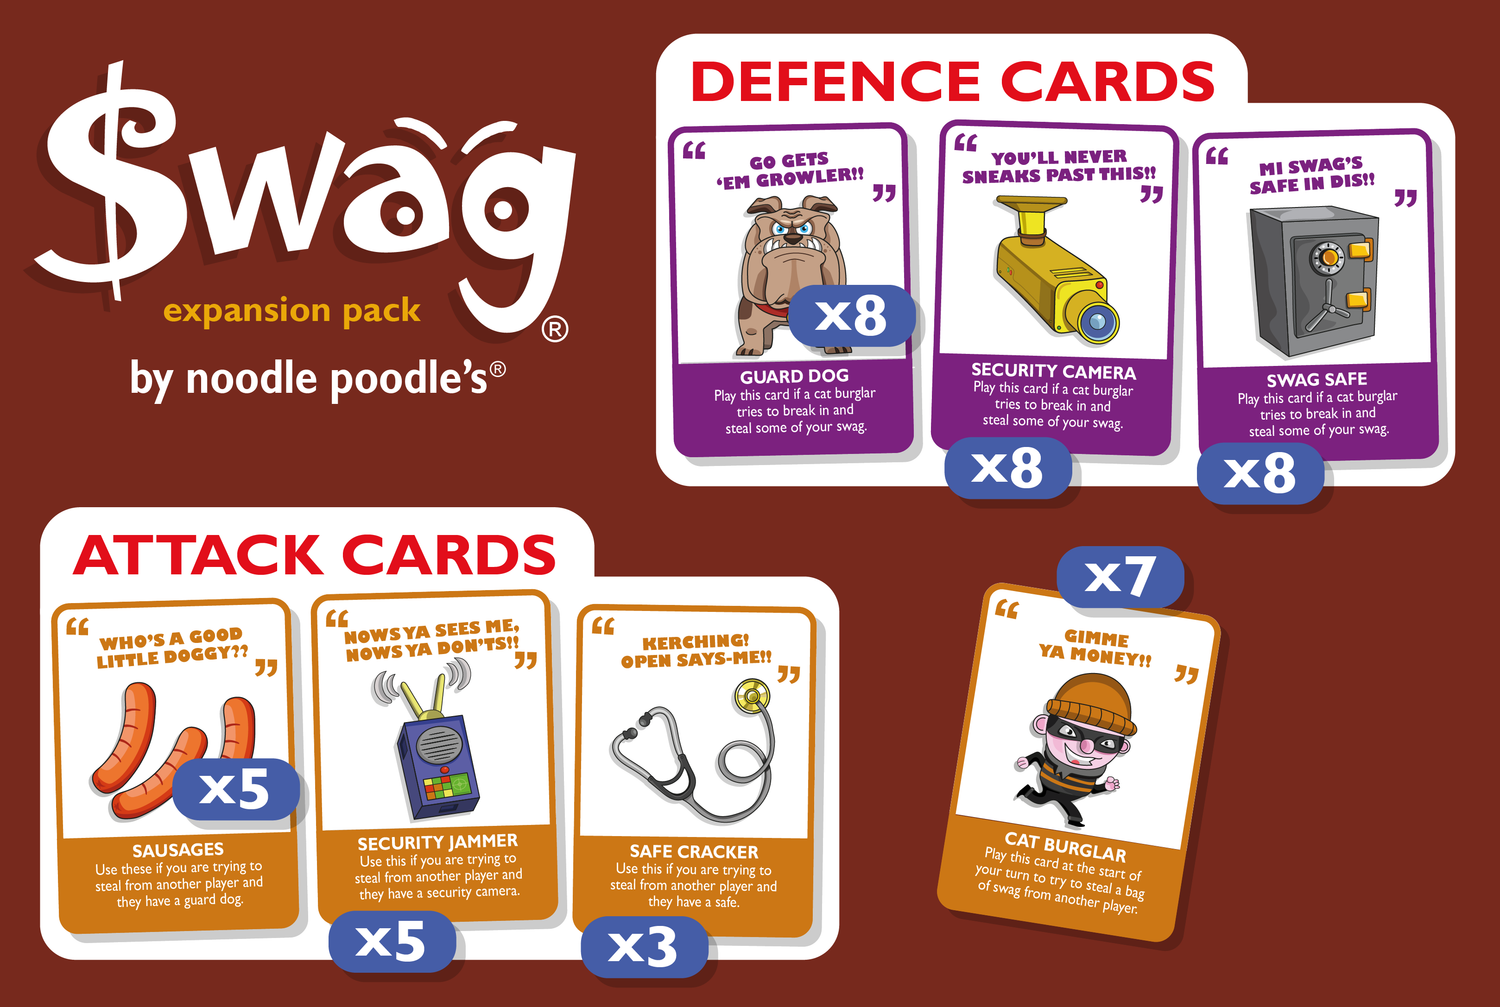 SWAG &quot;Gimme Ya Money&quot; Expansion Pack Card Game